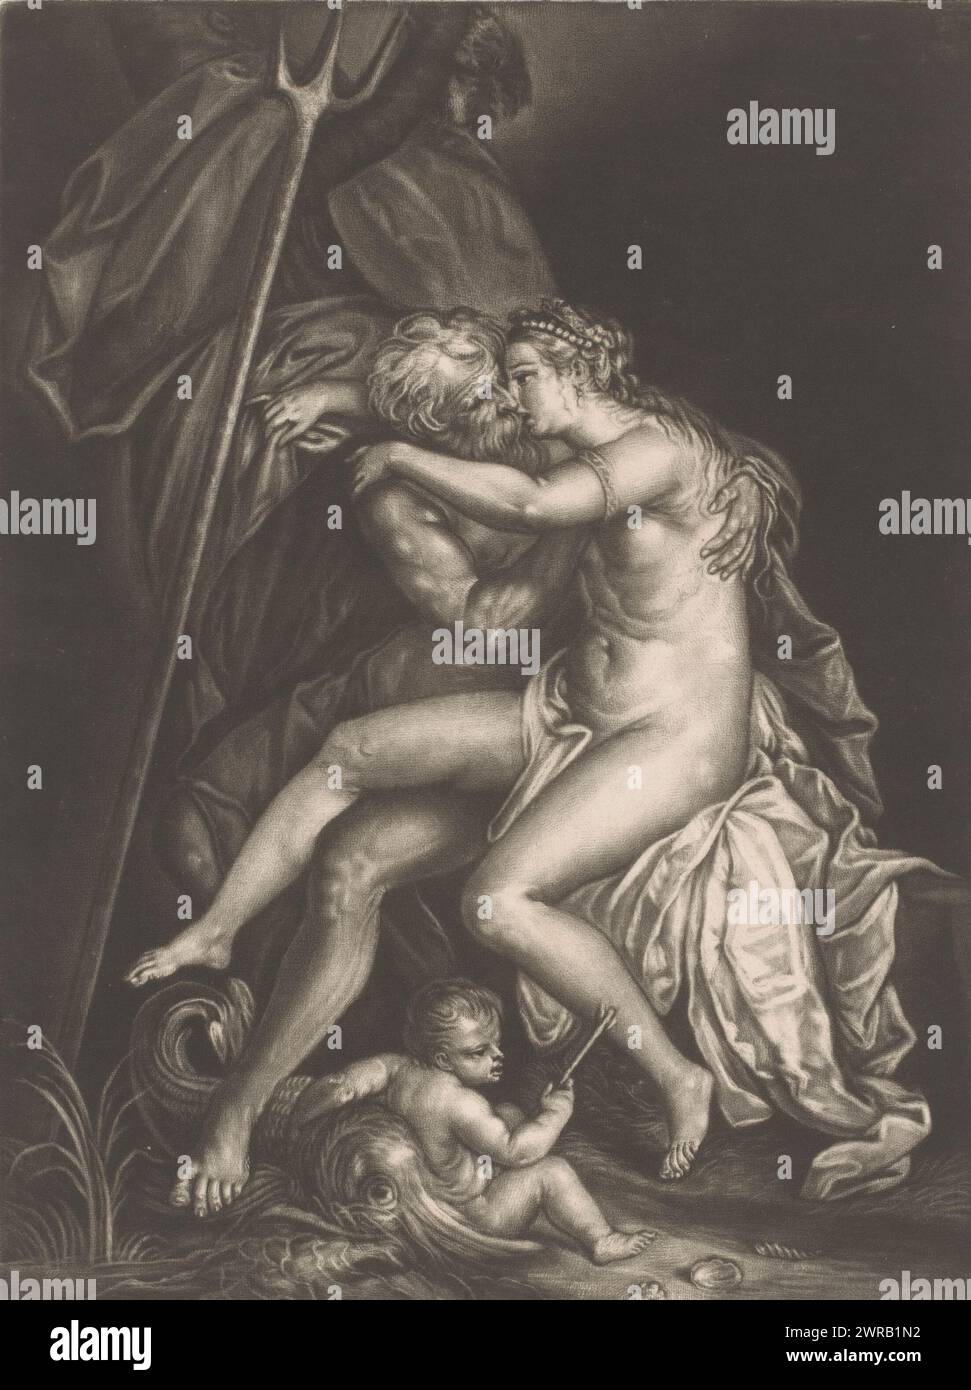 Neptune and Amphitrite kissing, print maker: John Smith (prentmaker/ uitgever), (attributed to), after print by: Giovanni Jacopo Caraglio, (possibly), after painting by: Perino del Vaga, (possibly), 1662 - 1742, paper, height 254 mm × width 180 mm, print Stock Photo